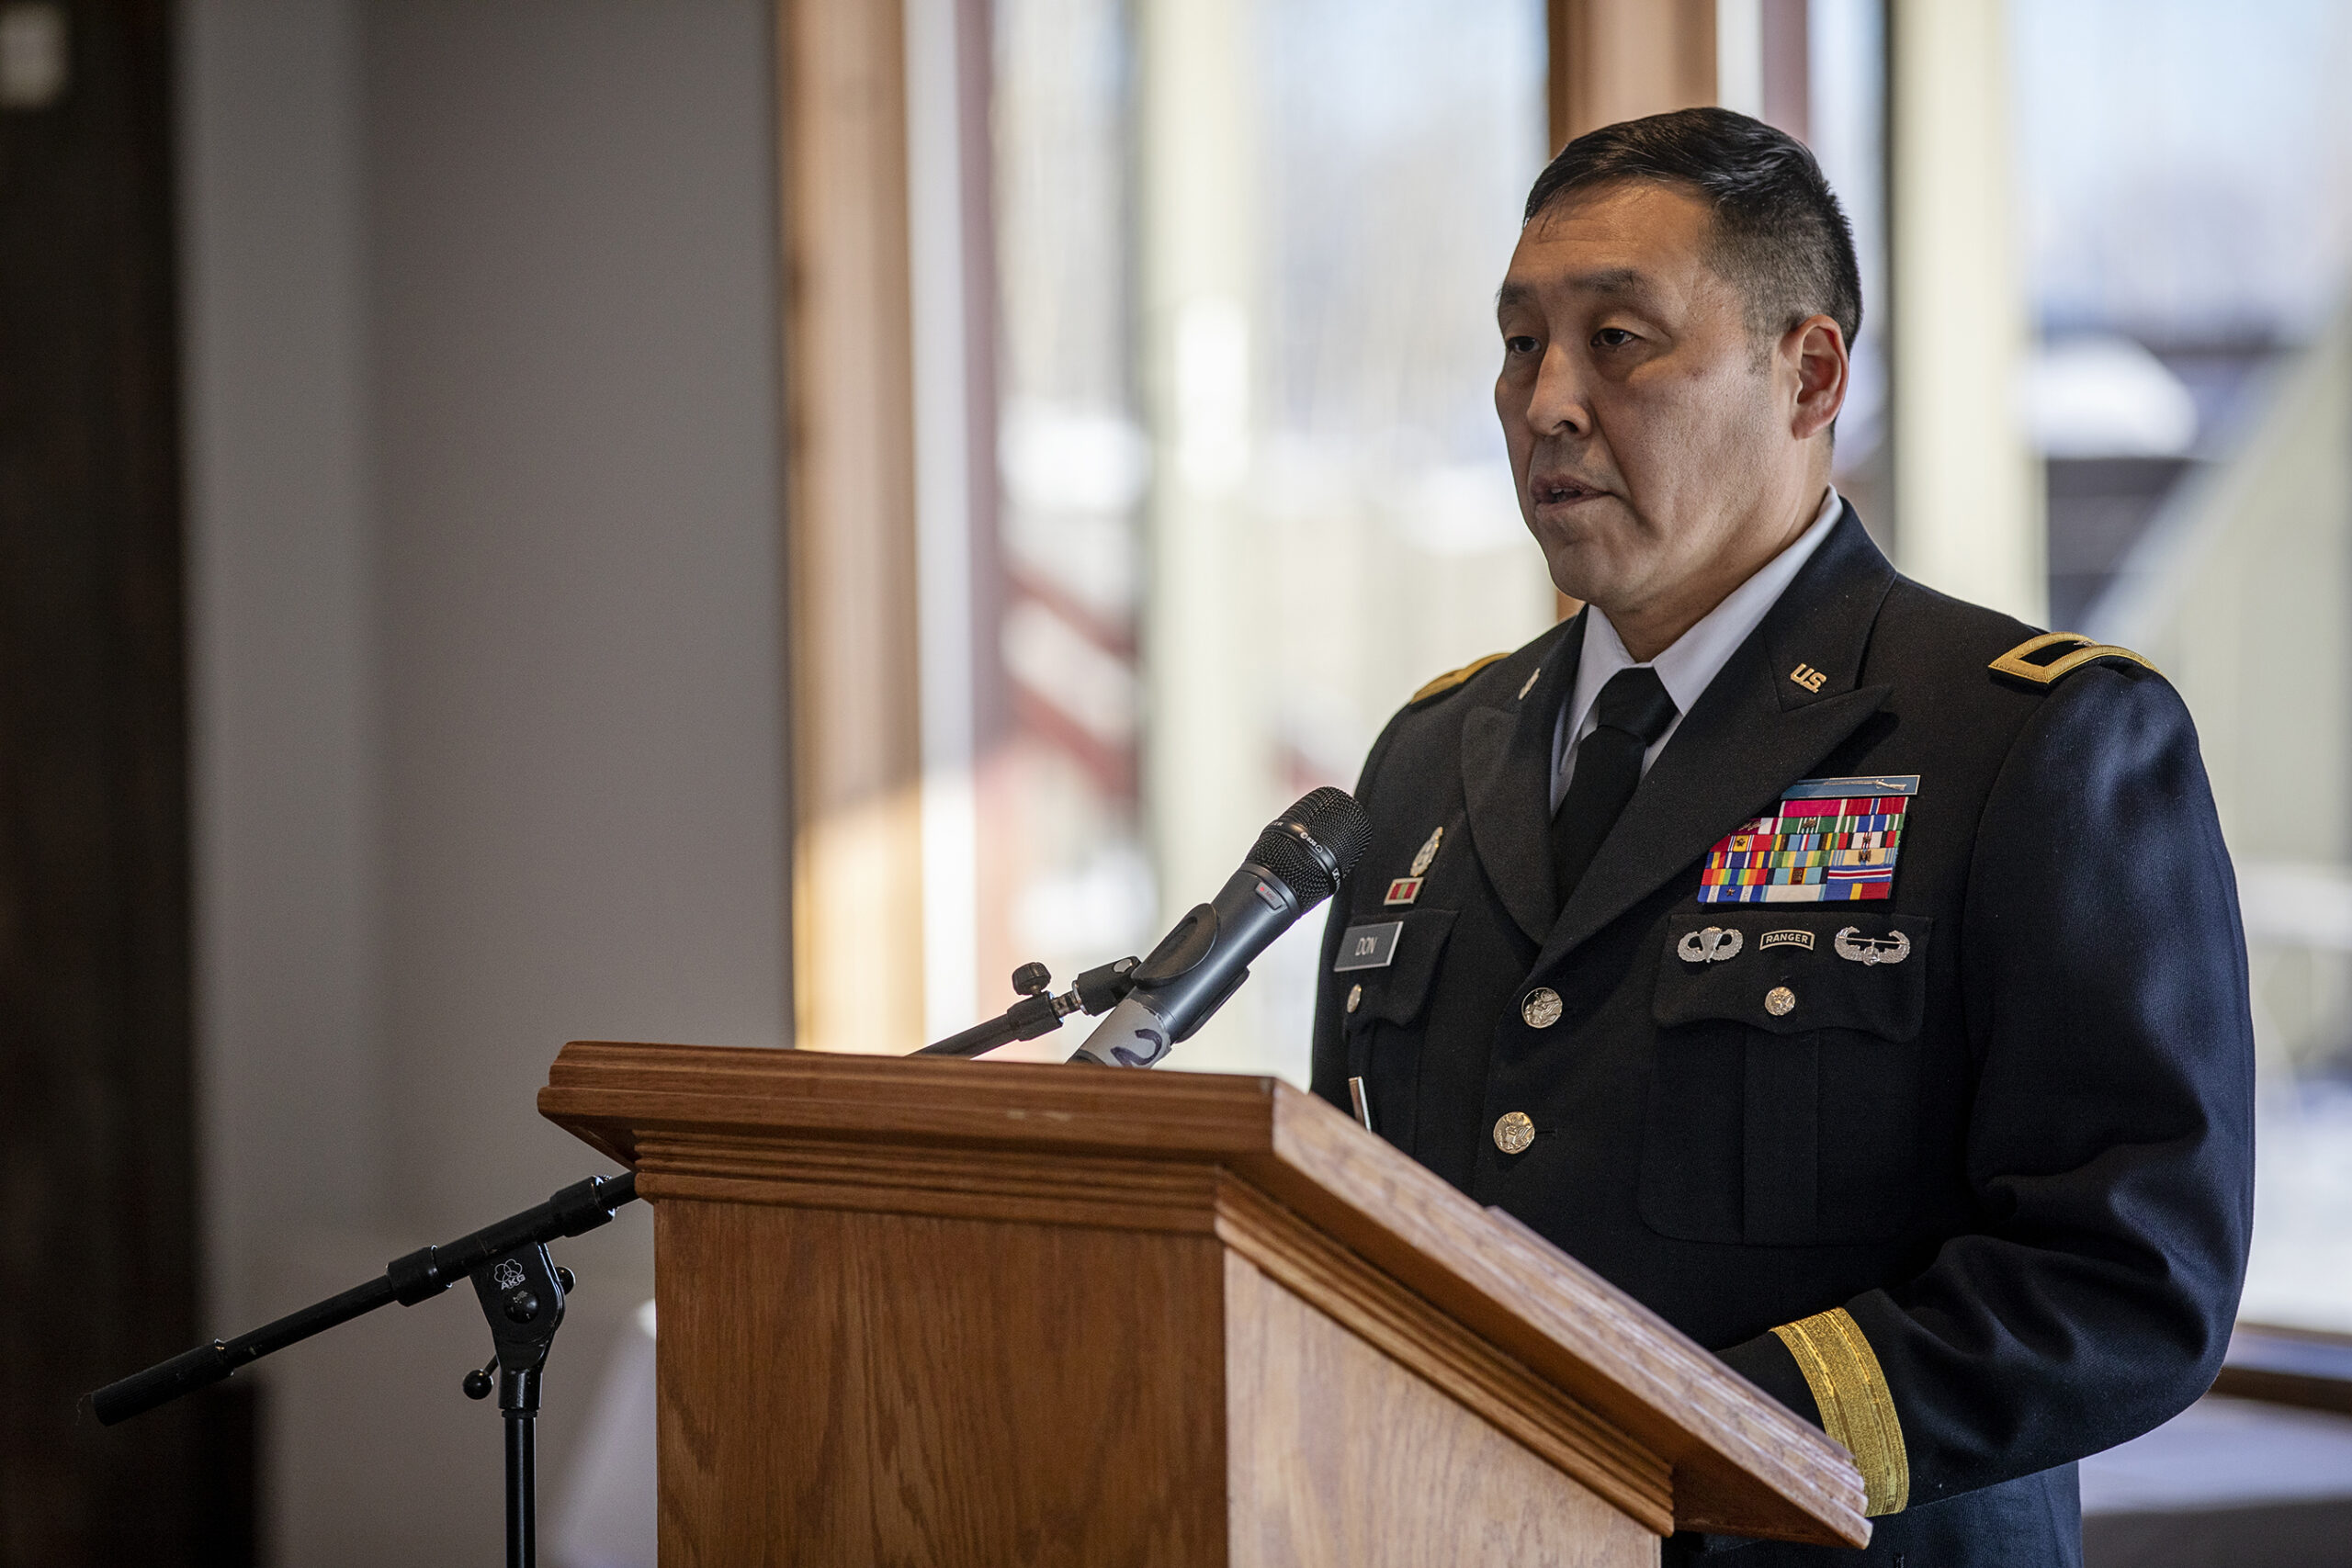 A man in a military uniform speaks at a podium